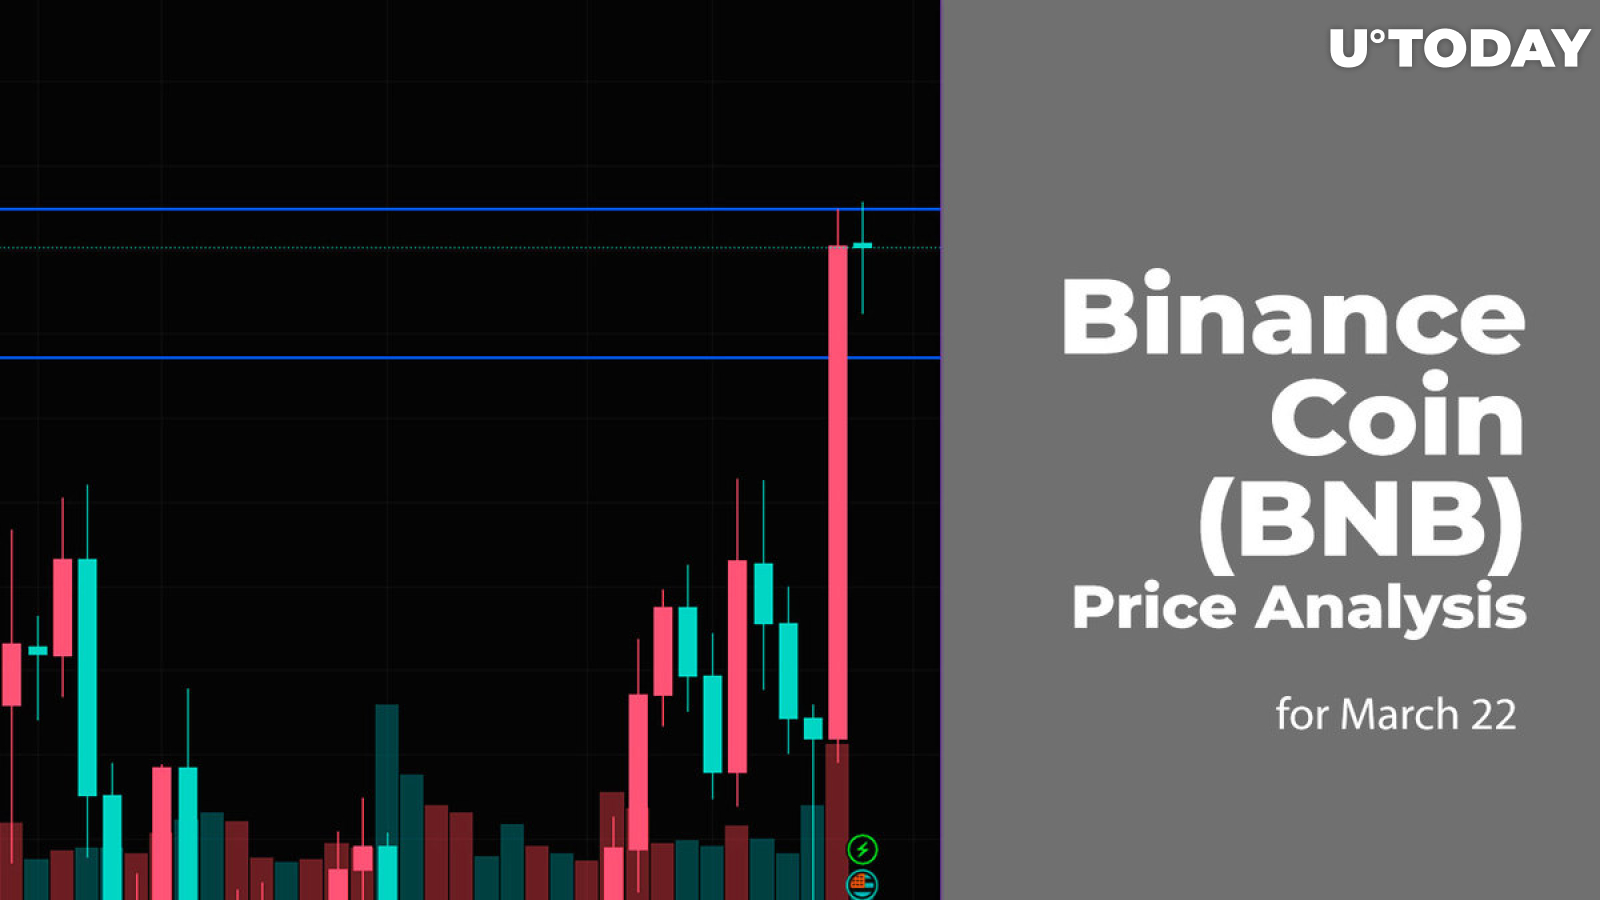 Binance Coin (BNB) Price Analysis for March 22